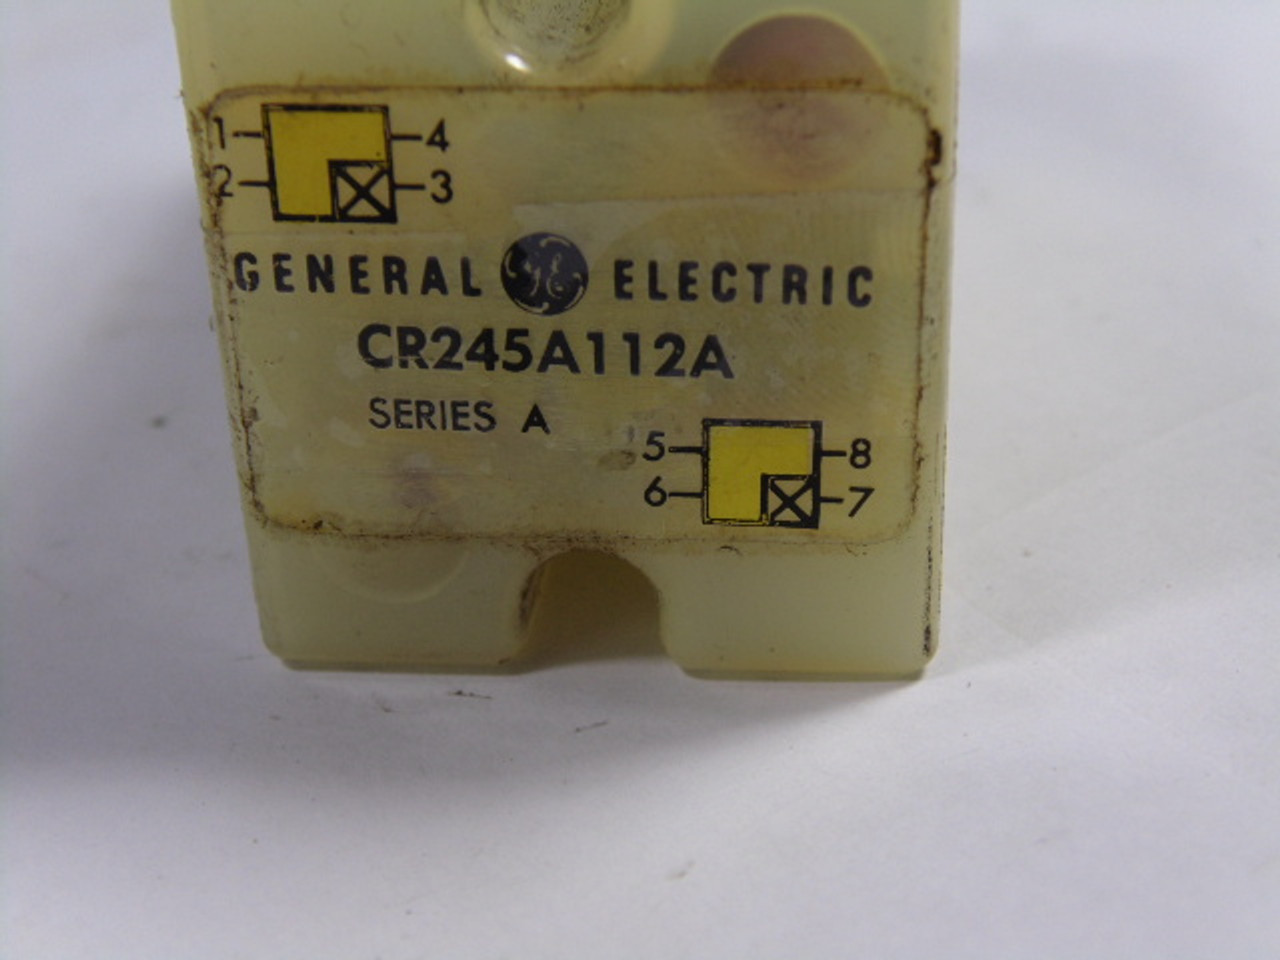 General Electric CR245A112A Electric State Control Relay SER A USED